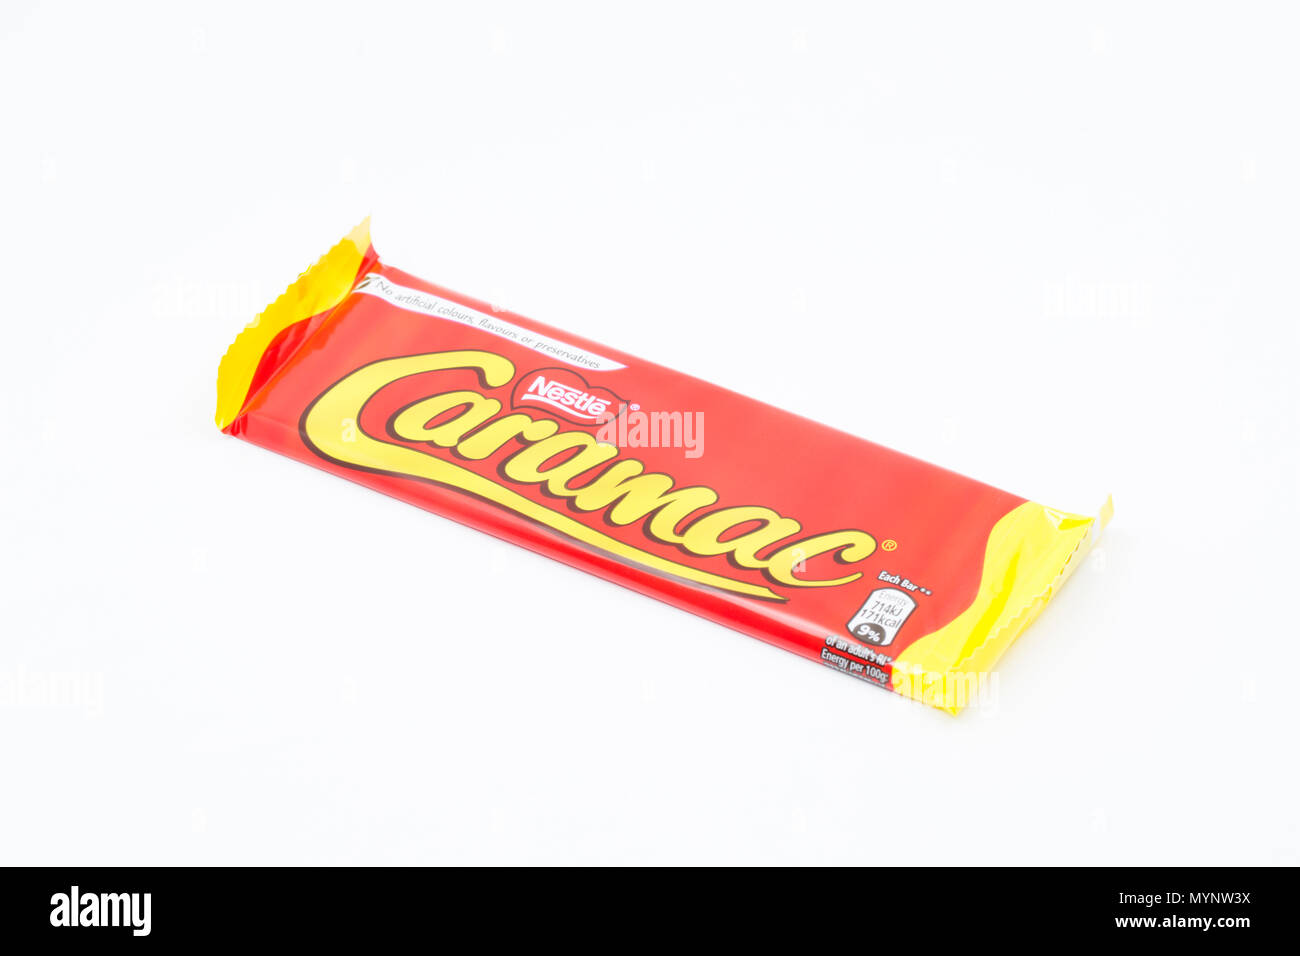 A Nestle Caramac caramel flavour bar bought from a supermarket in the UK. Dorset England UK GB Stock Photo